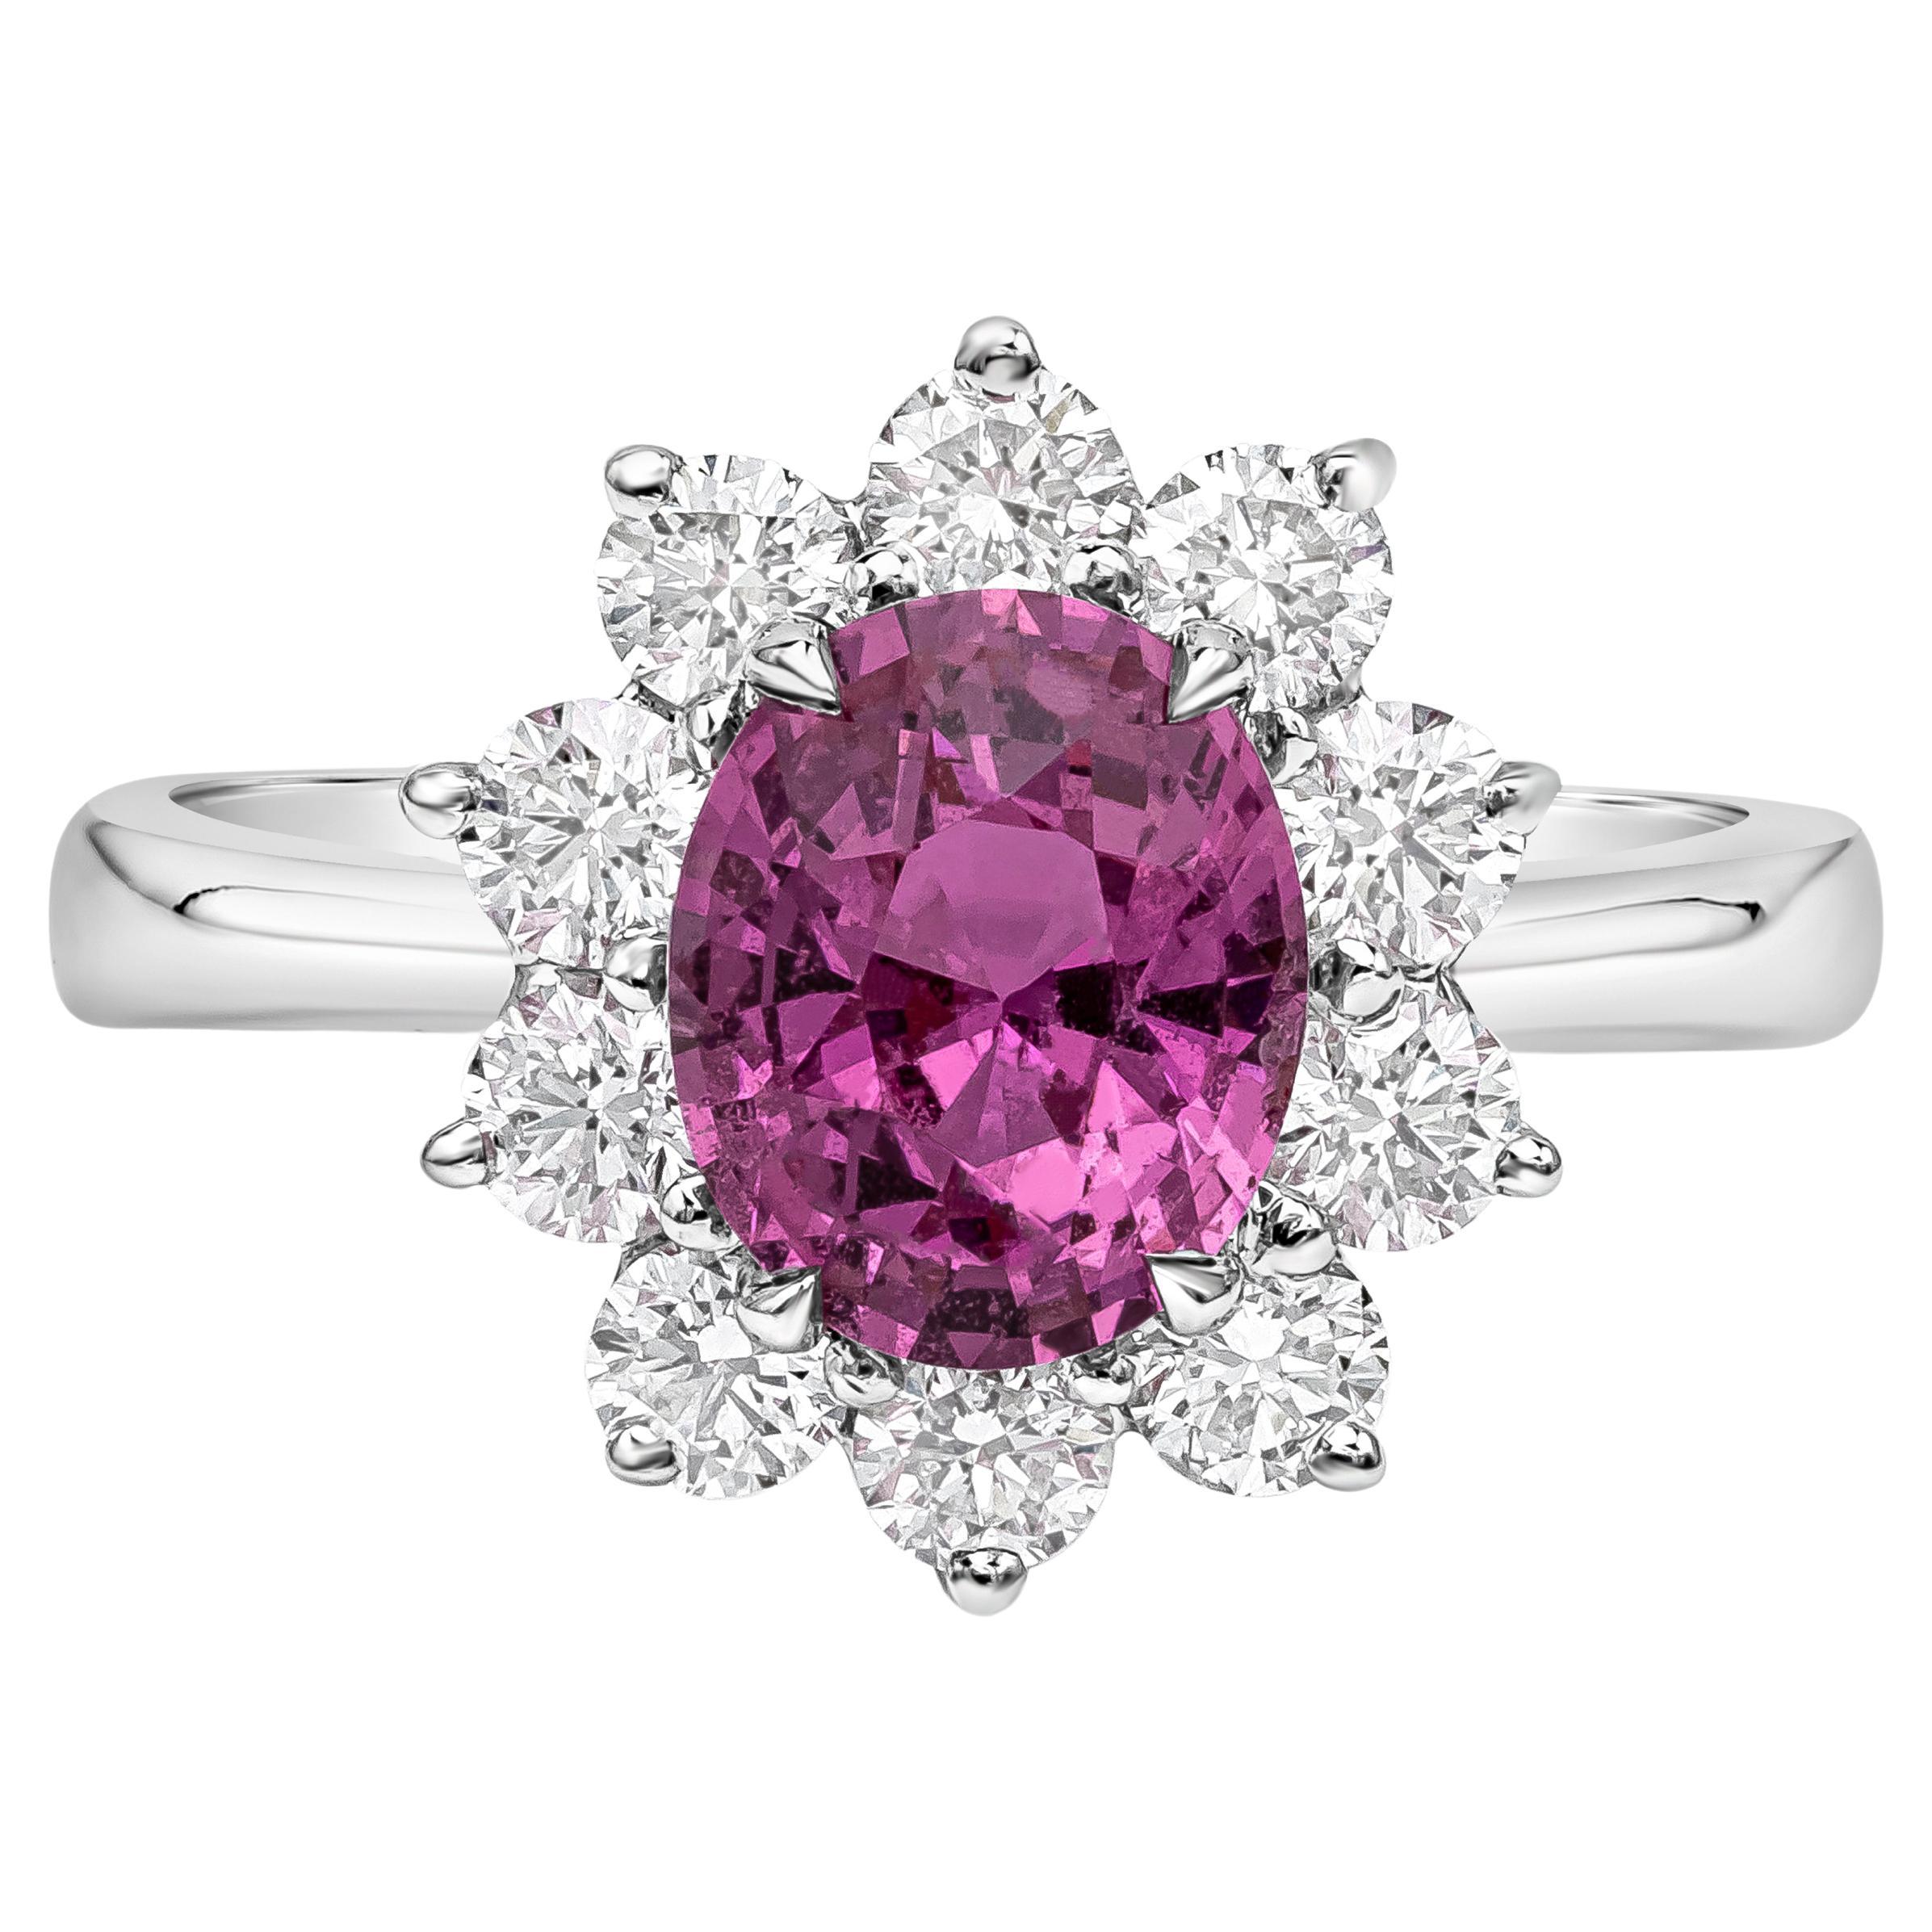 1.89 Carat Oval Cut Pink Sapphire and Diamond Halo Engagement Ring